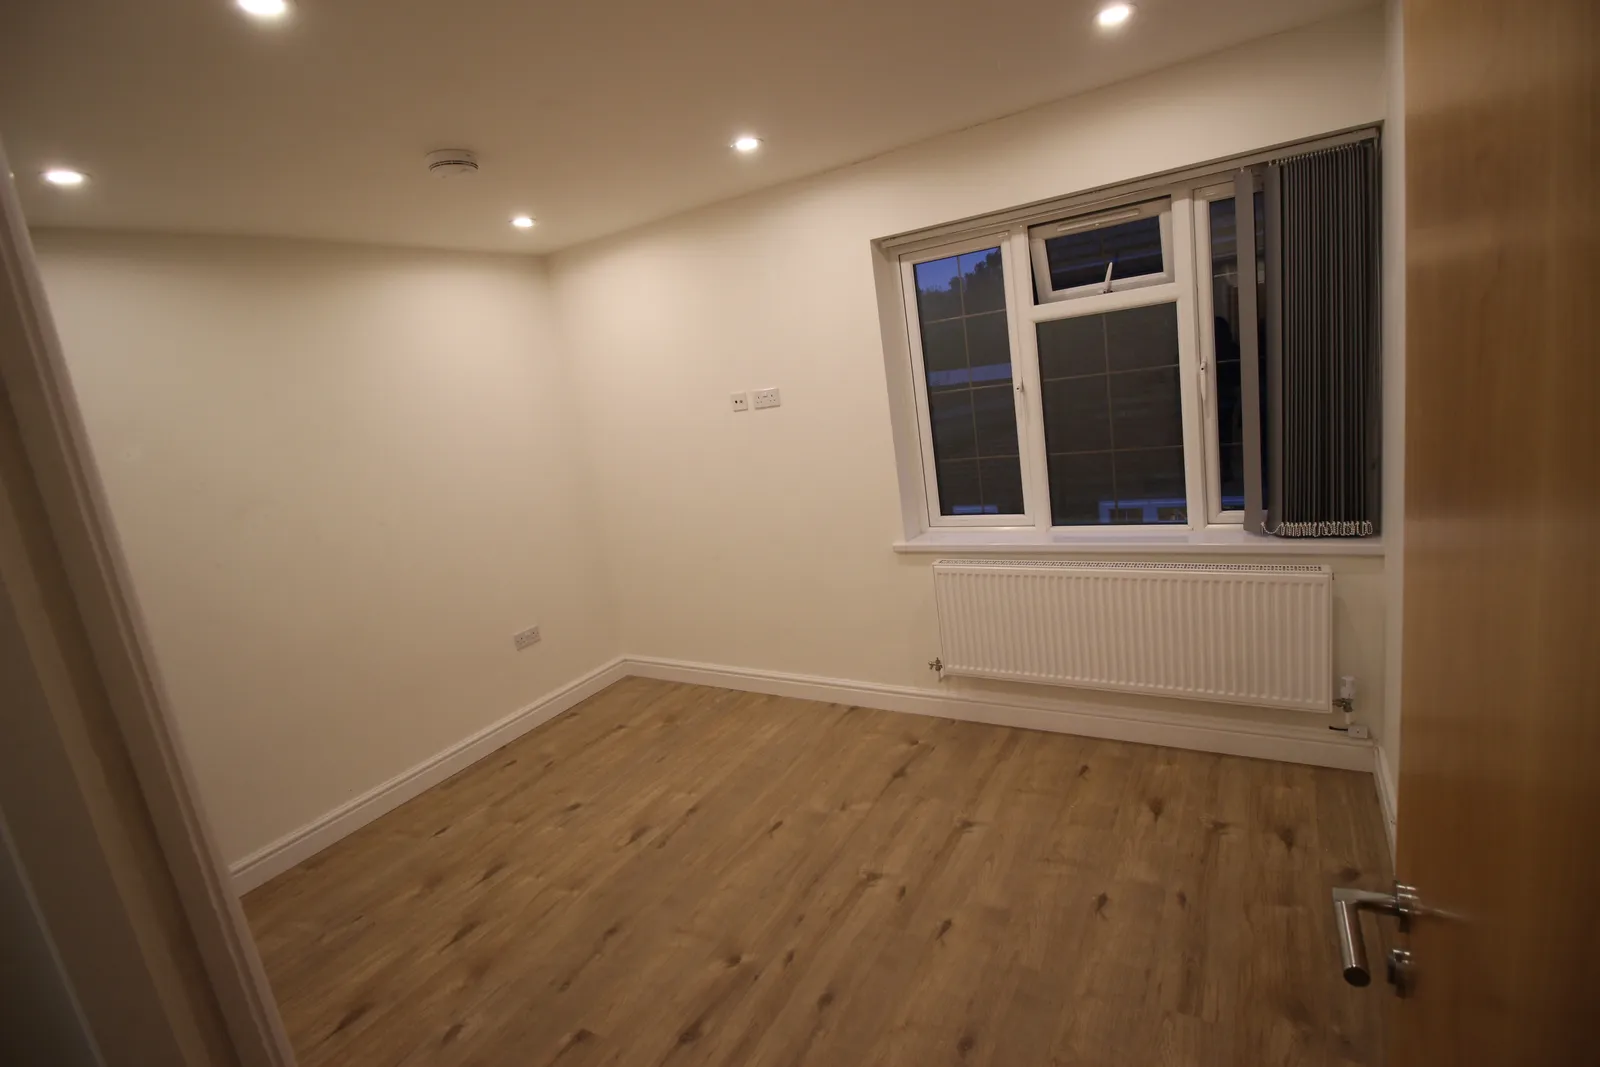 1 bed Room for rent in HIGH WYCOMBE. From Hamly Real Estate Ltd - Slough